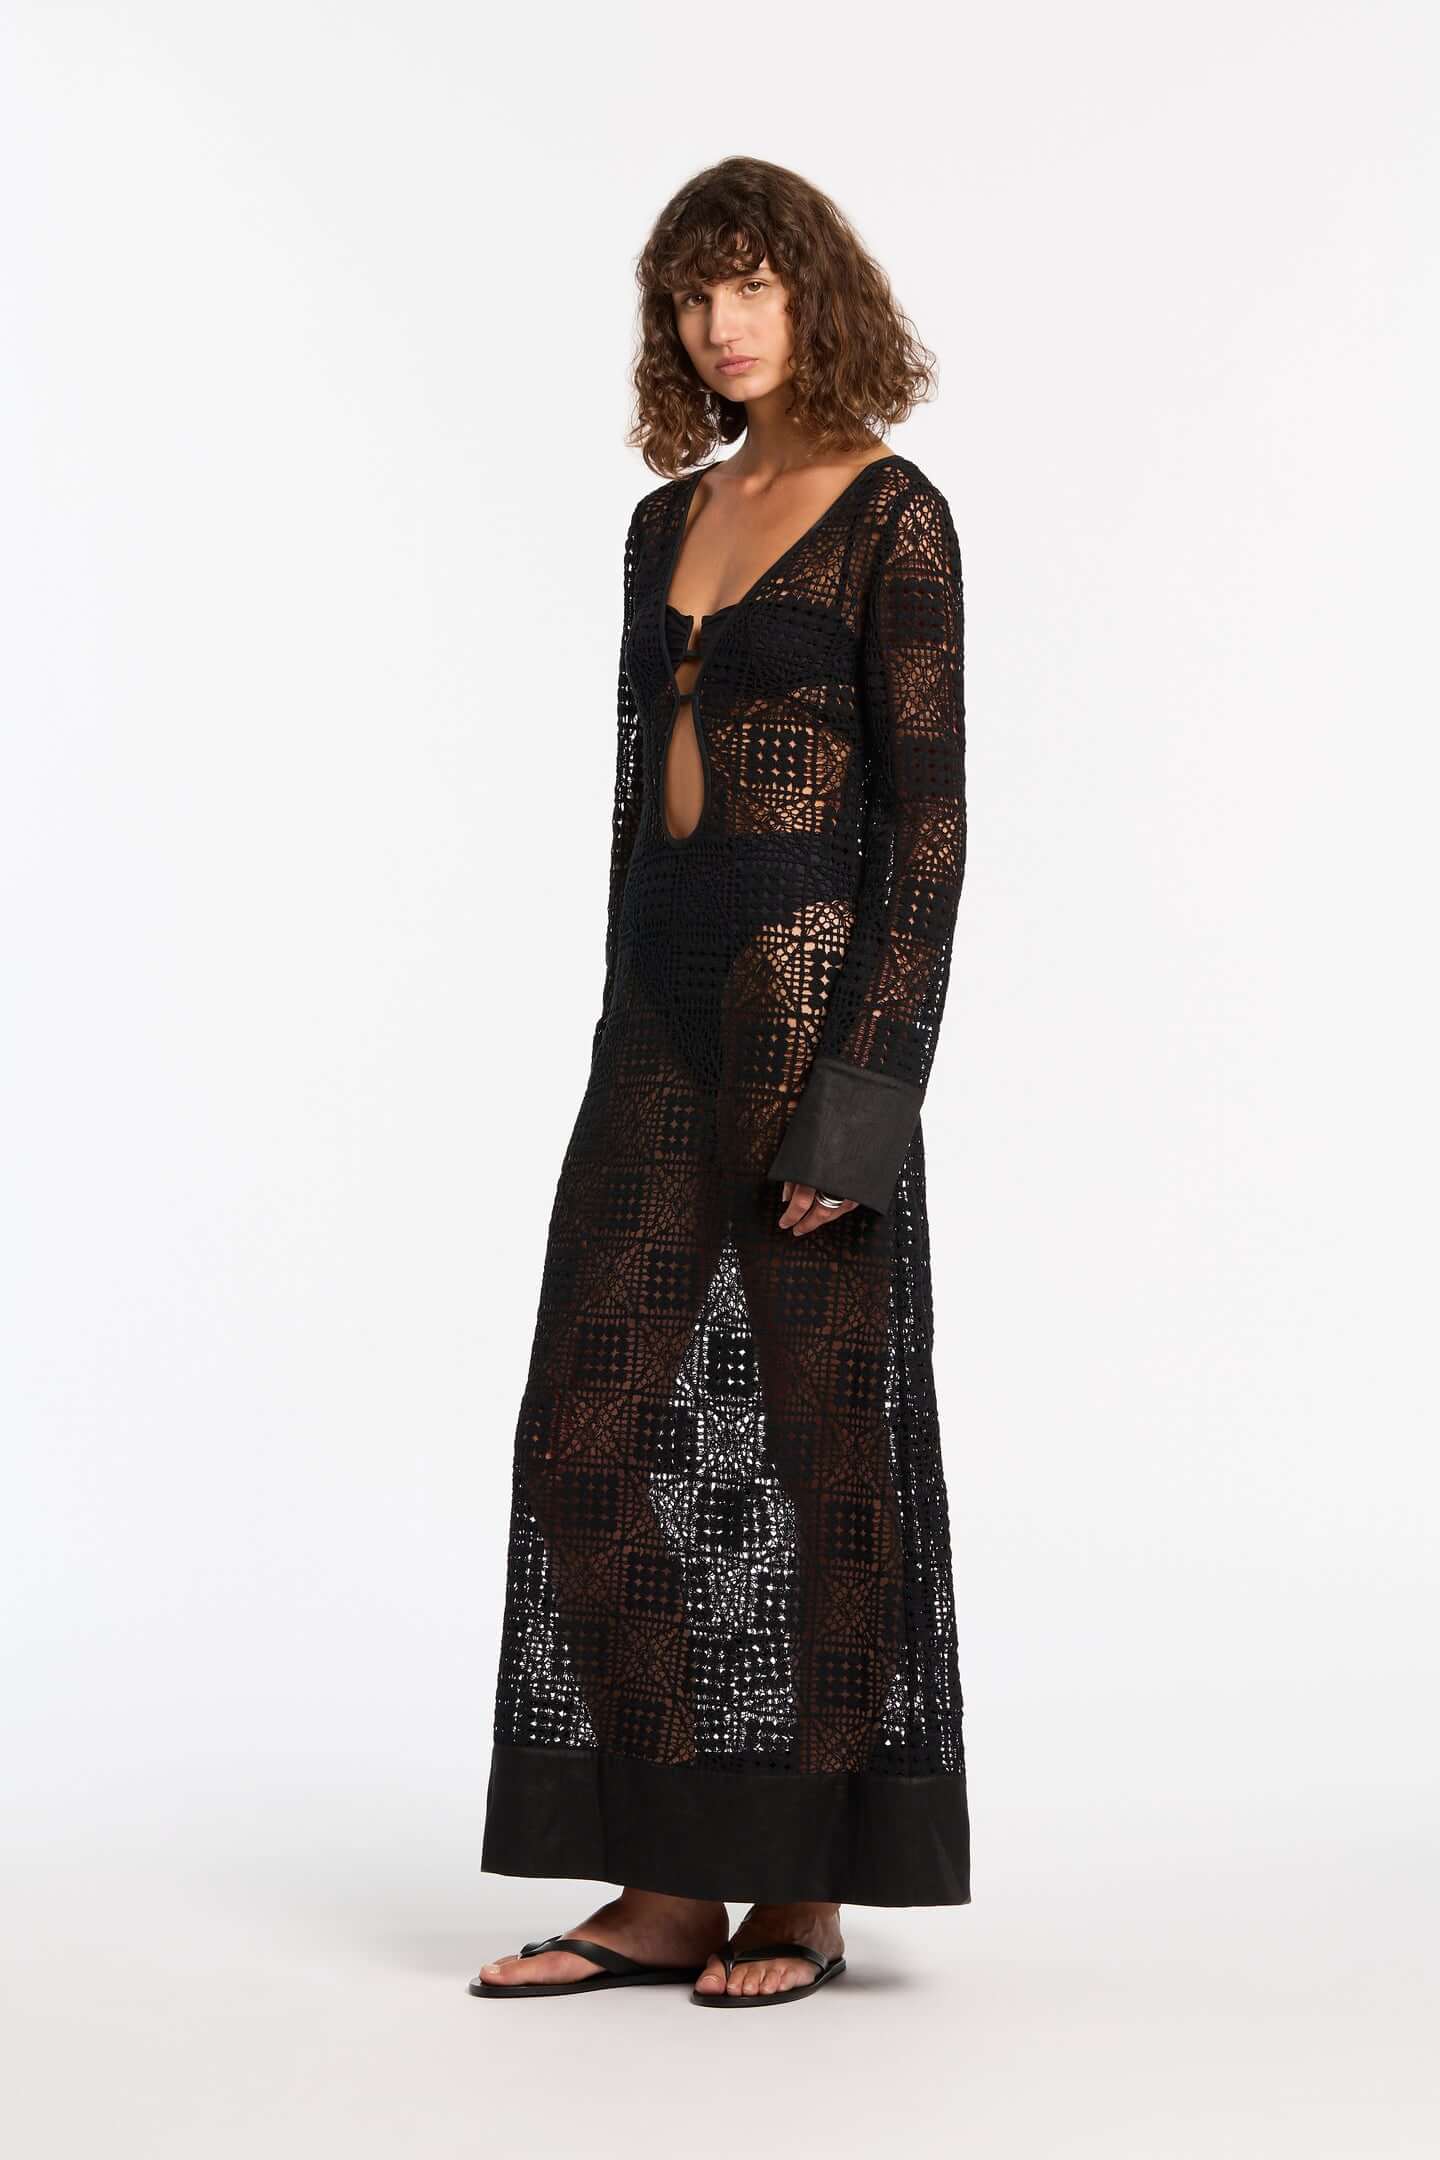 SIR Rayure Long Sleeve Maxi Dress in Black available at TNT The New Trend Australia.